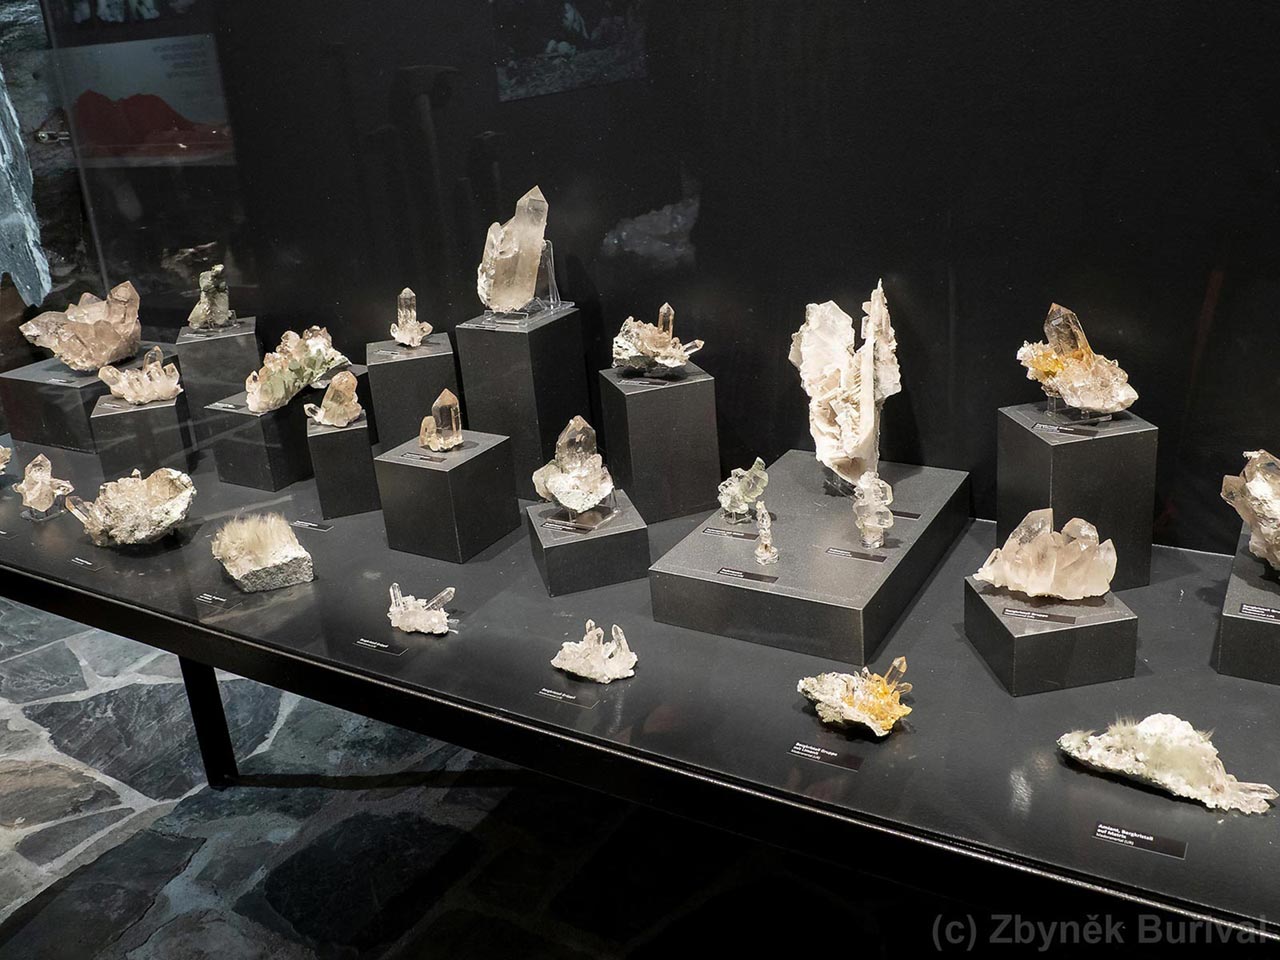 Mineral display with quartz, calcite and amiant from Switzerland